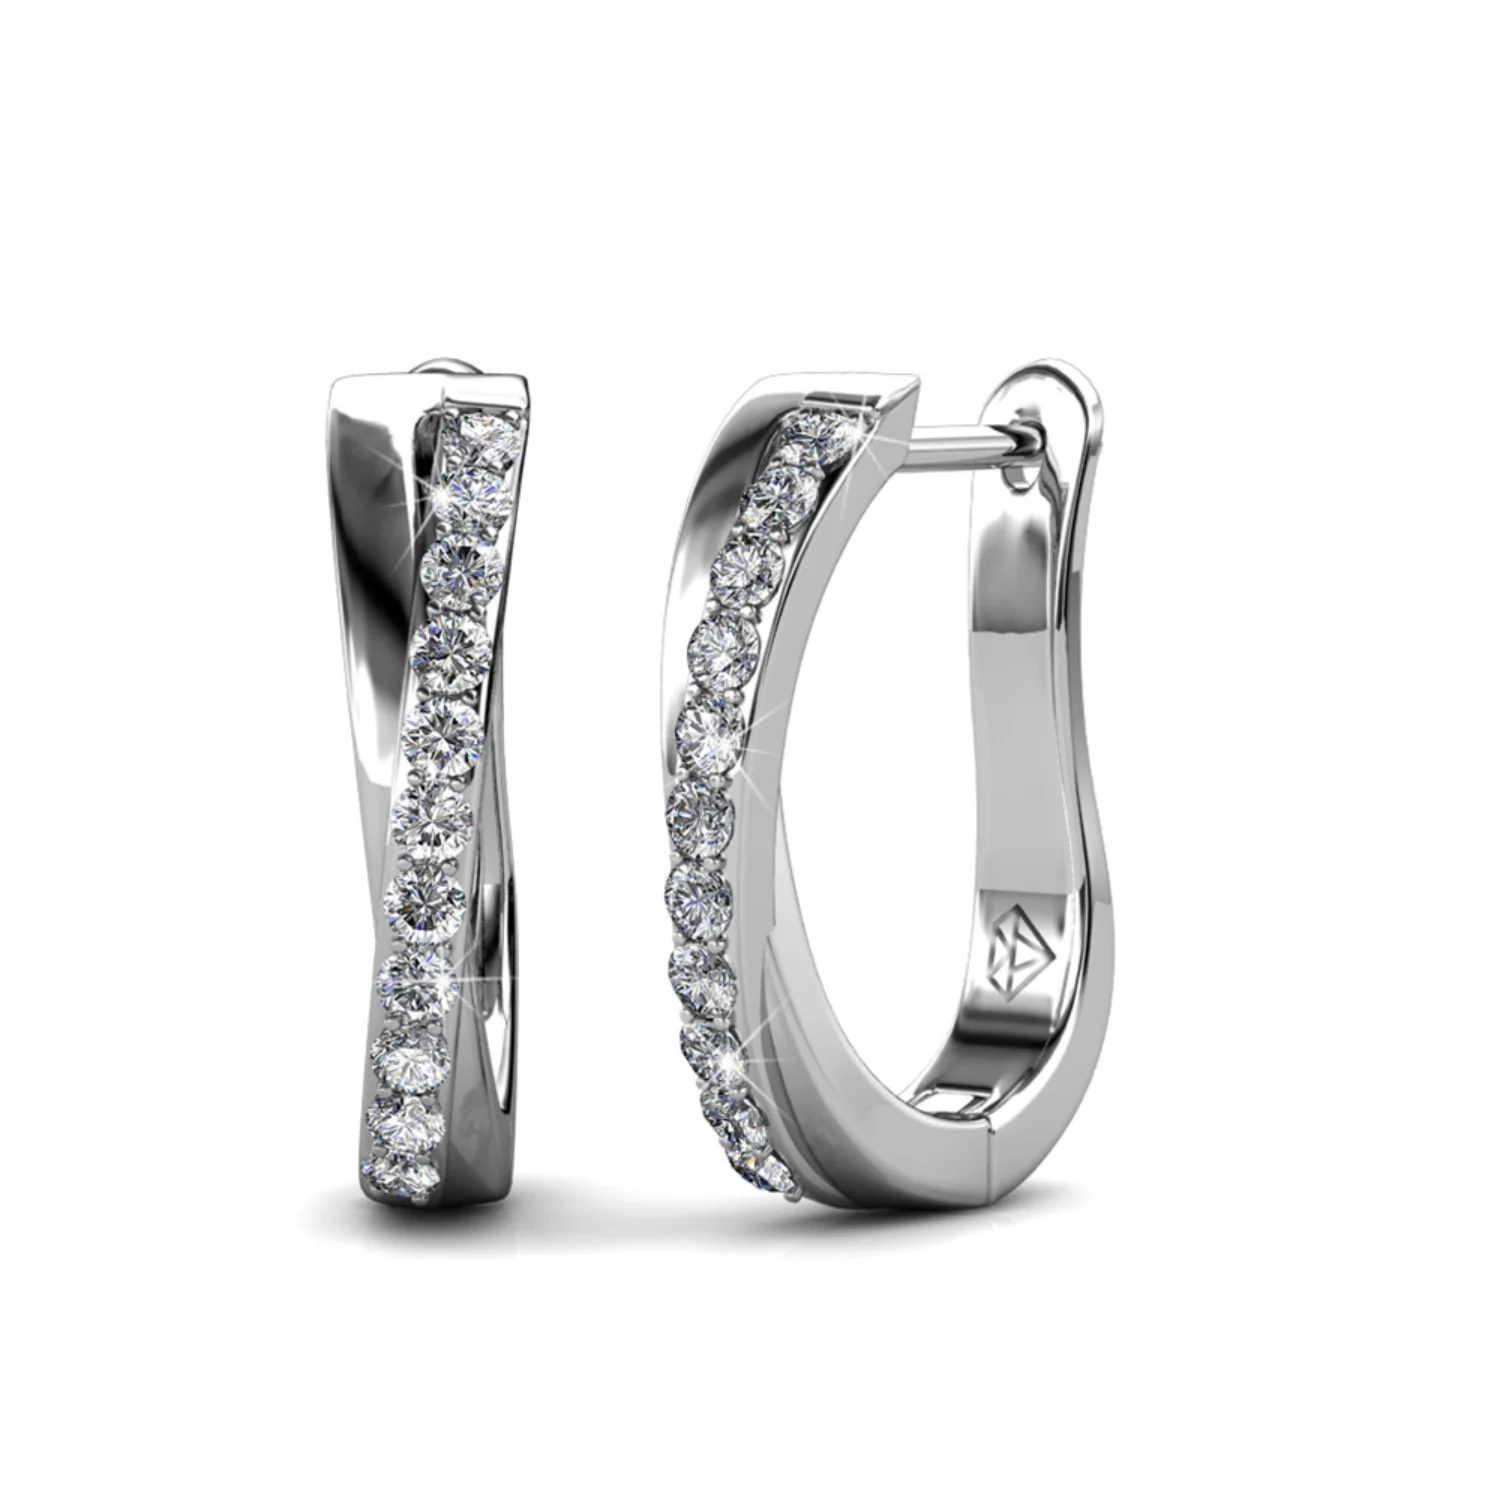 

Adventurous 18k White Gold Hoop Earrings w/ Crystals, Sparkling Silver Twisted Hoops Earring Set w/Solitaire Round Cut Crystals